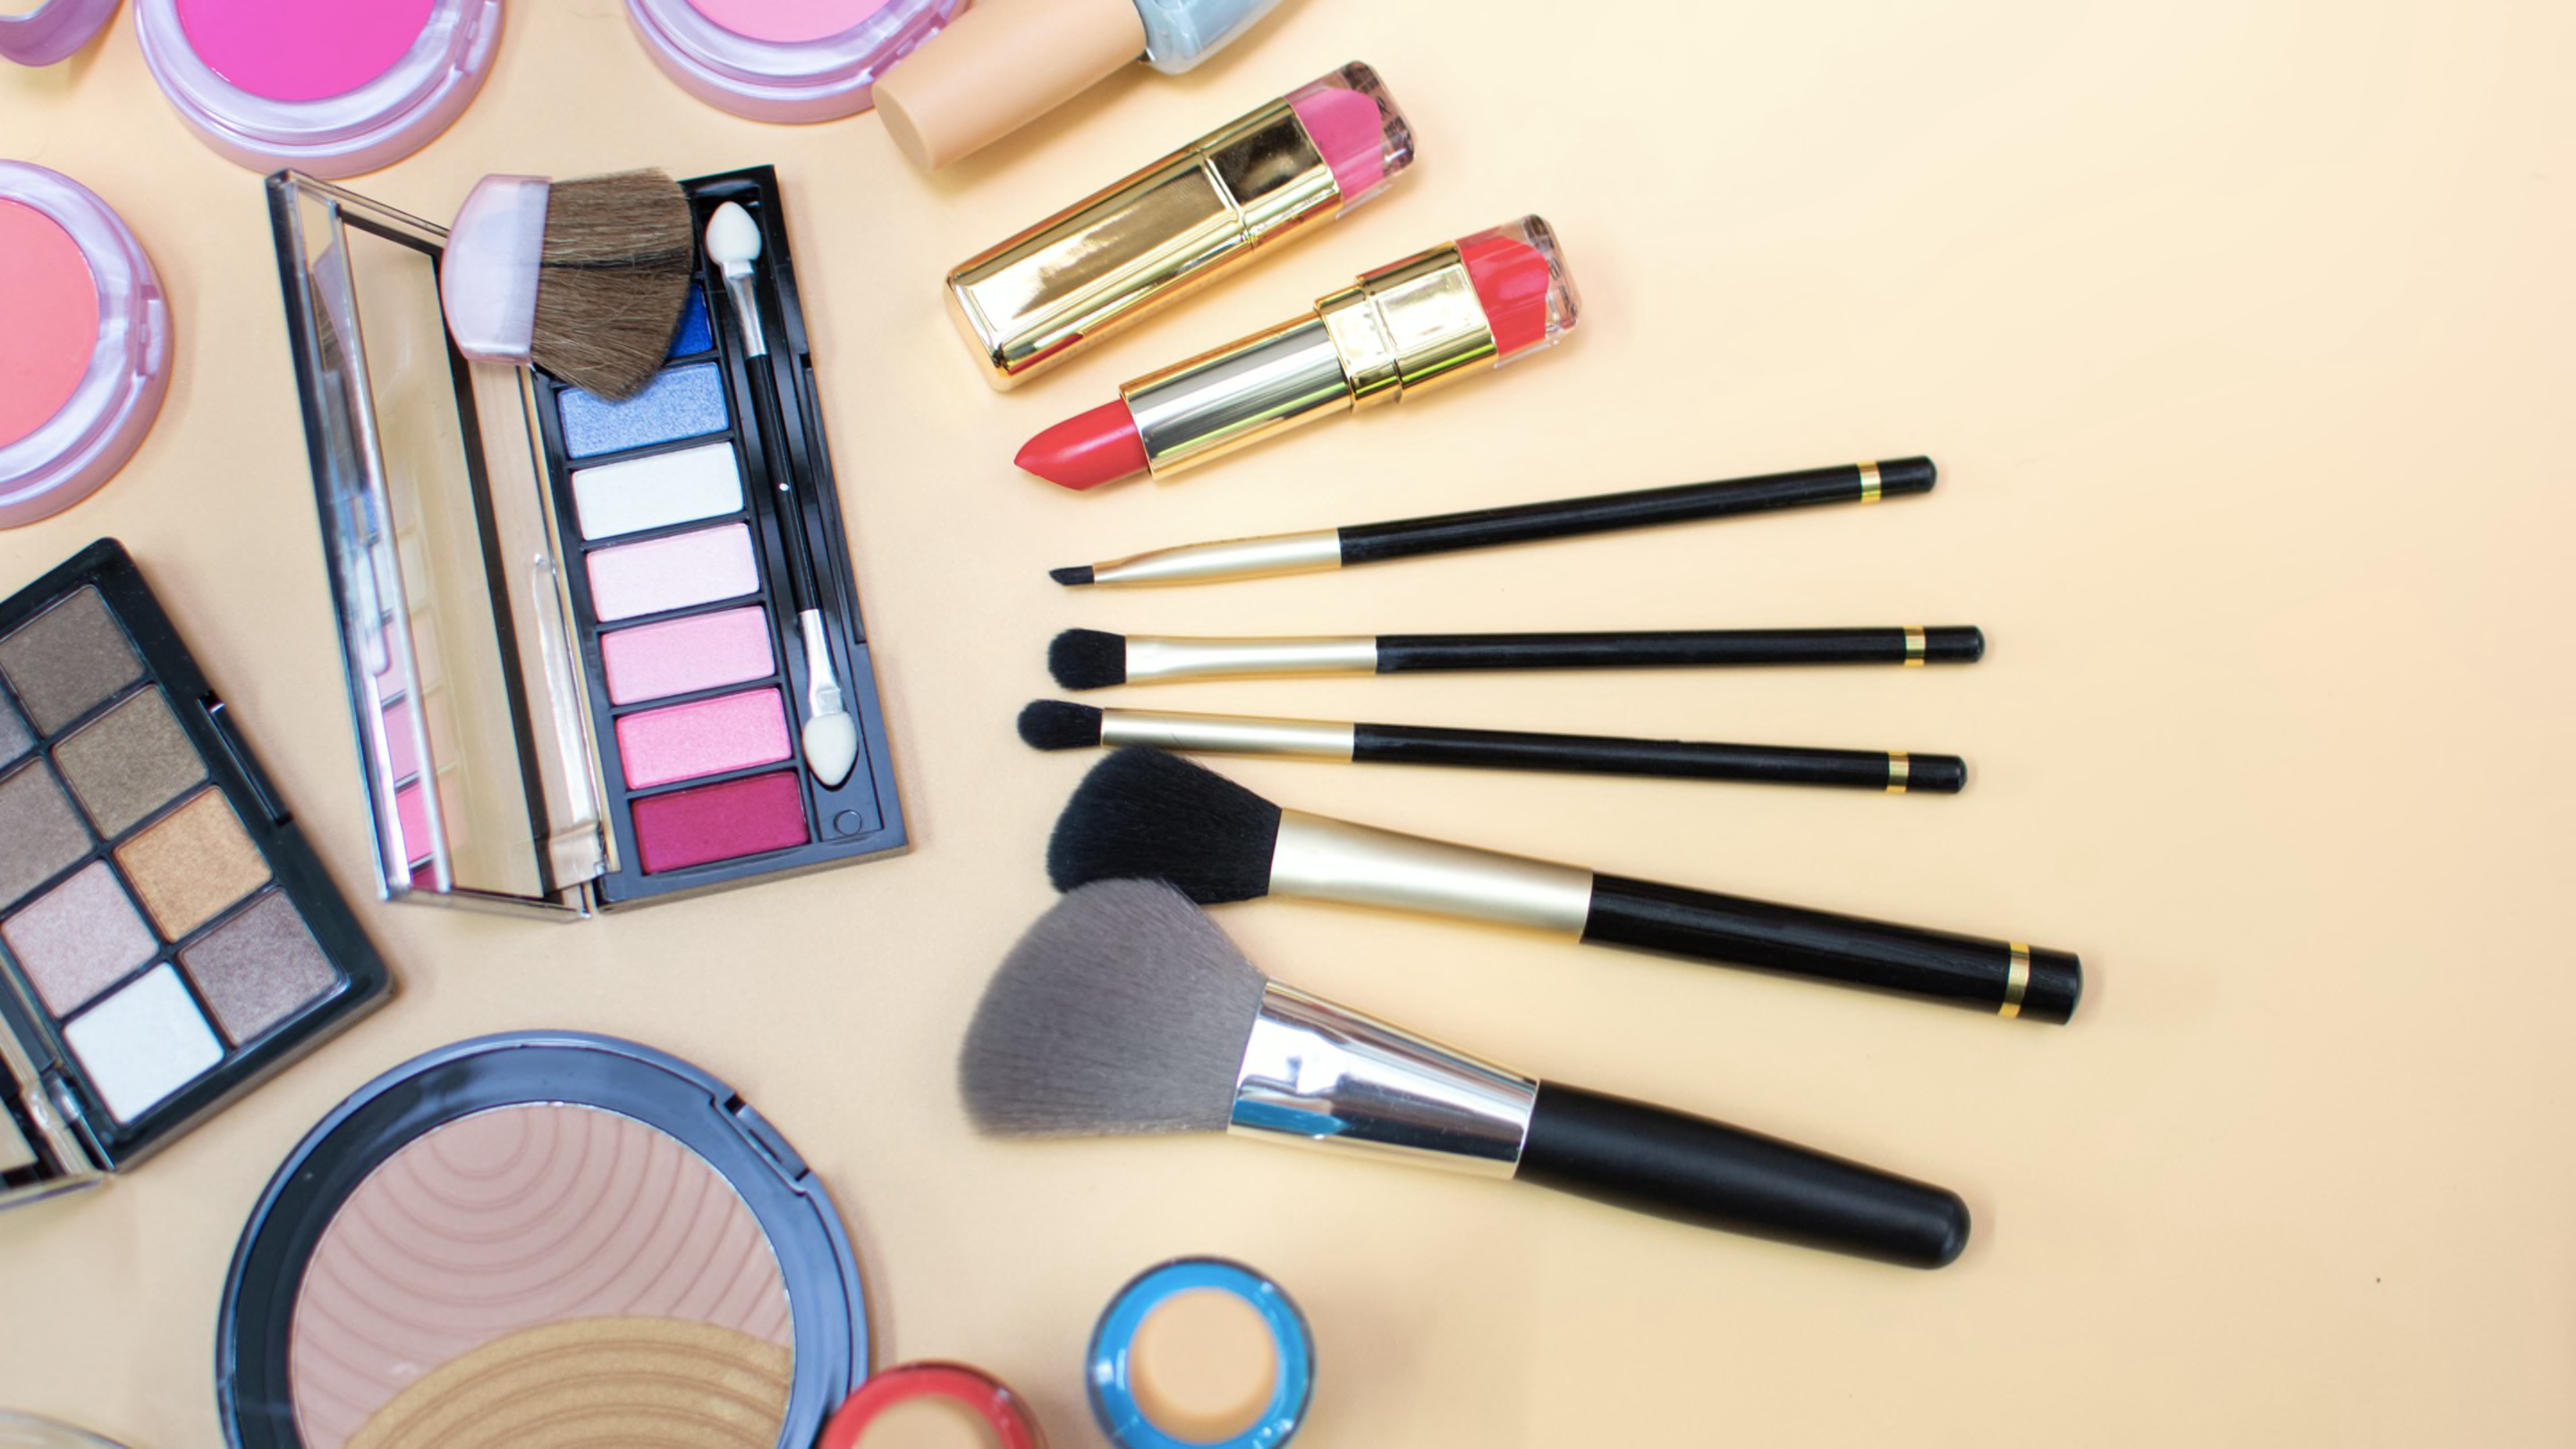 4 Signs That Your Favorite Makeup and Skincare Products Have Gone Bad,
According to Beauty Experts